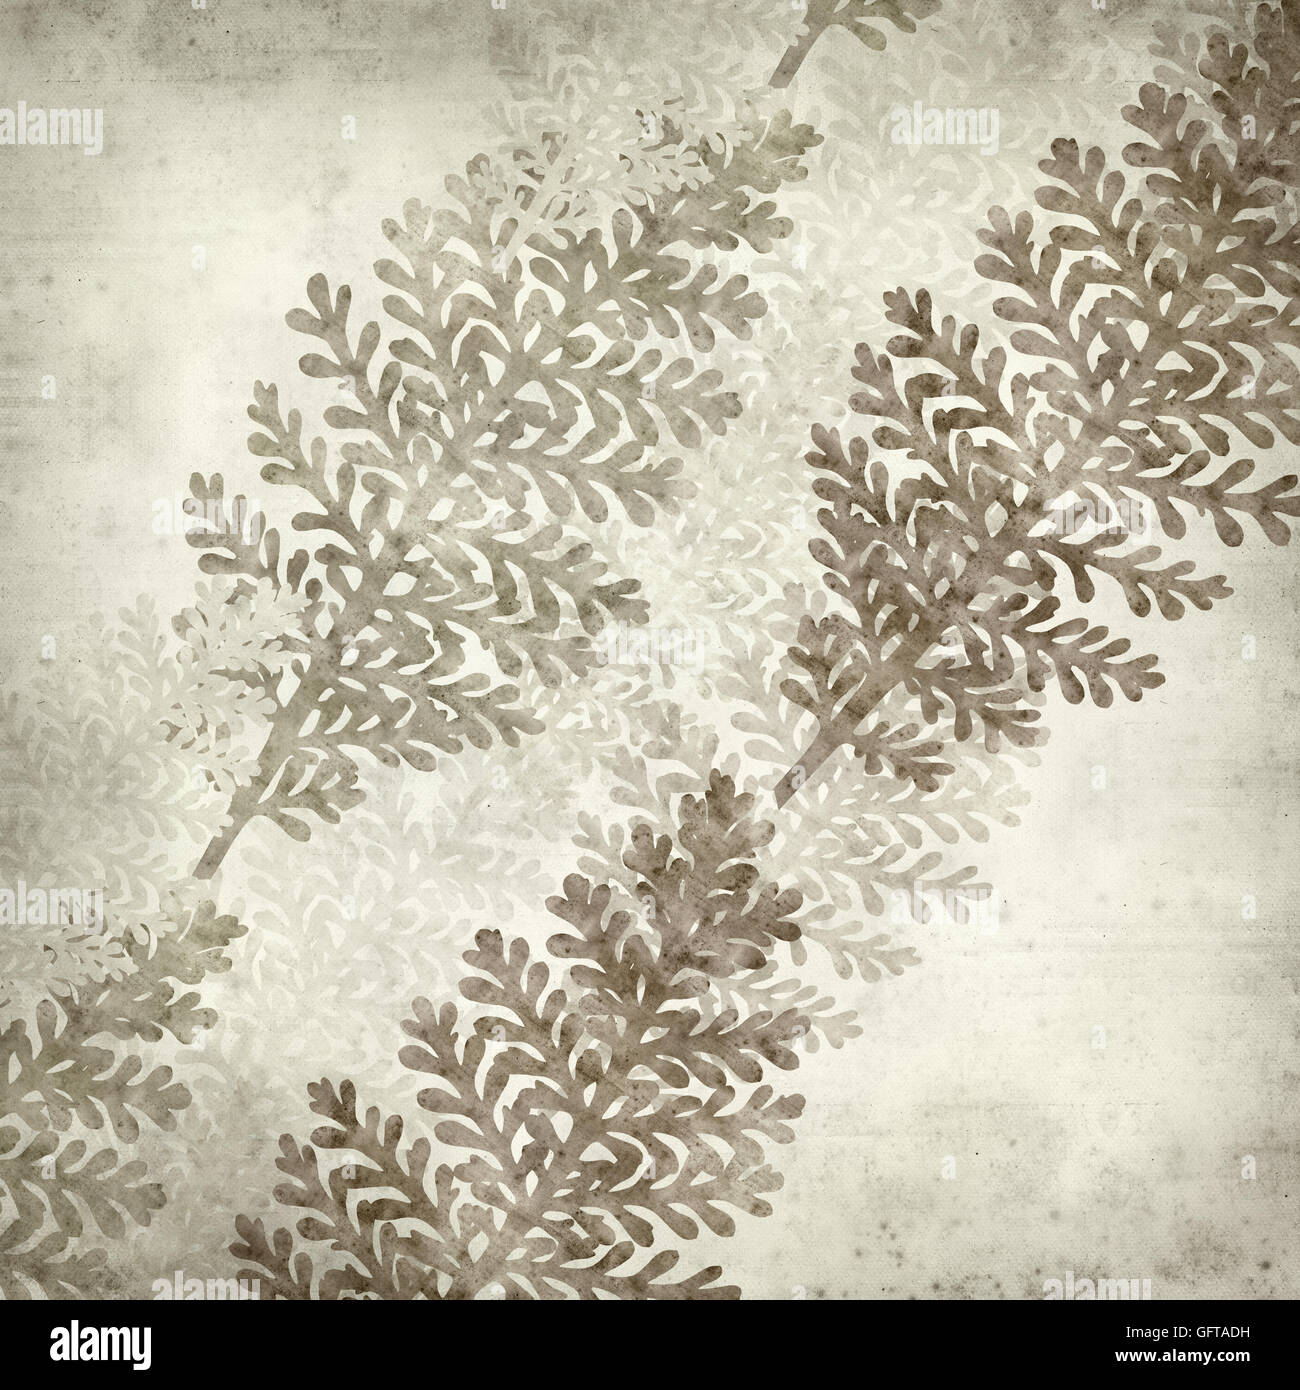 textured old paper background with leaves of silver lace plant Stock Photo